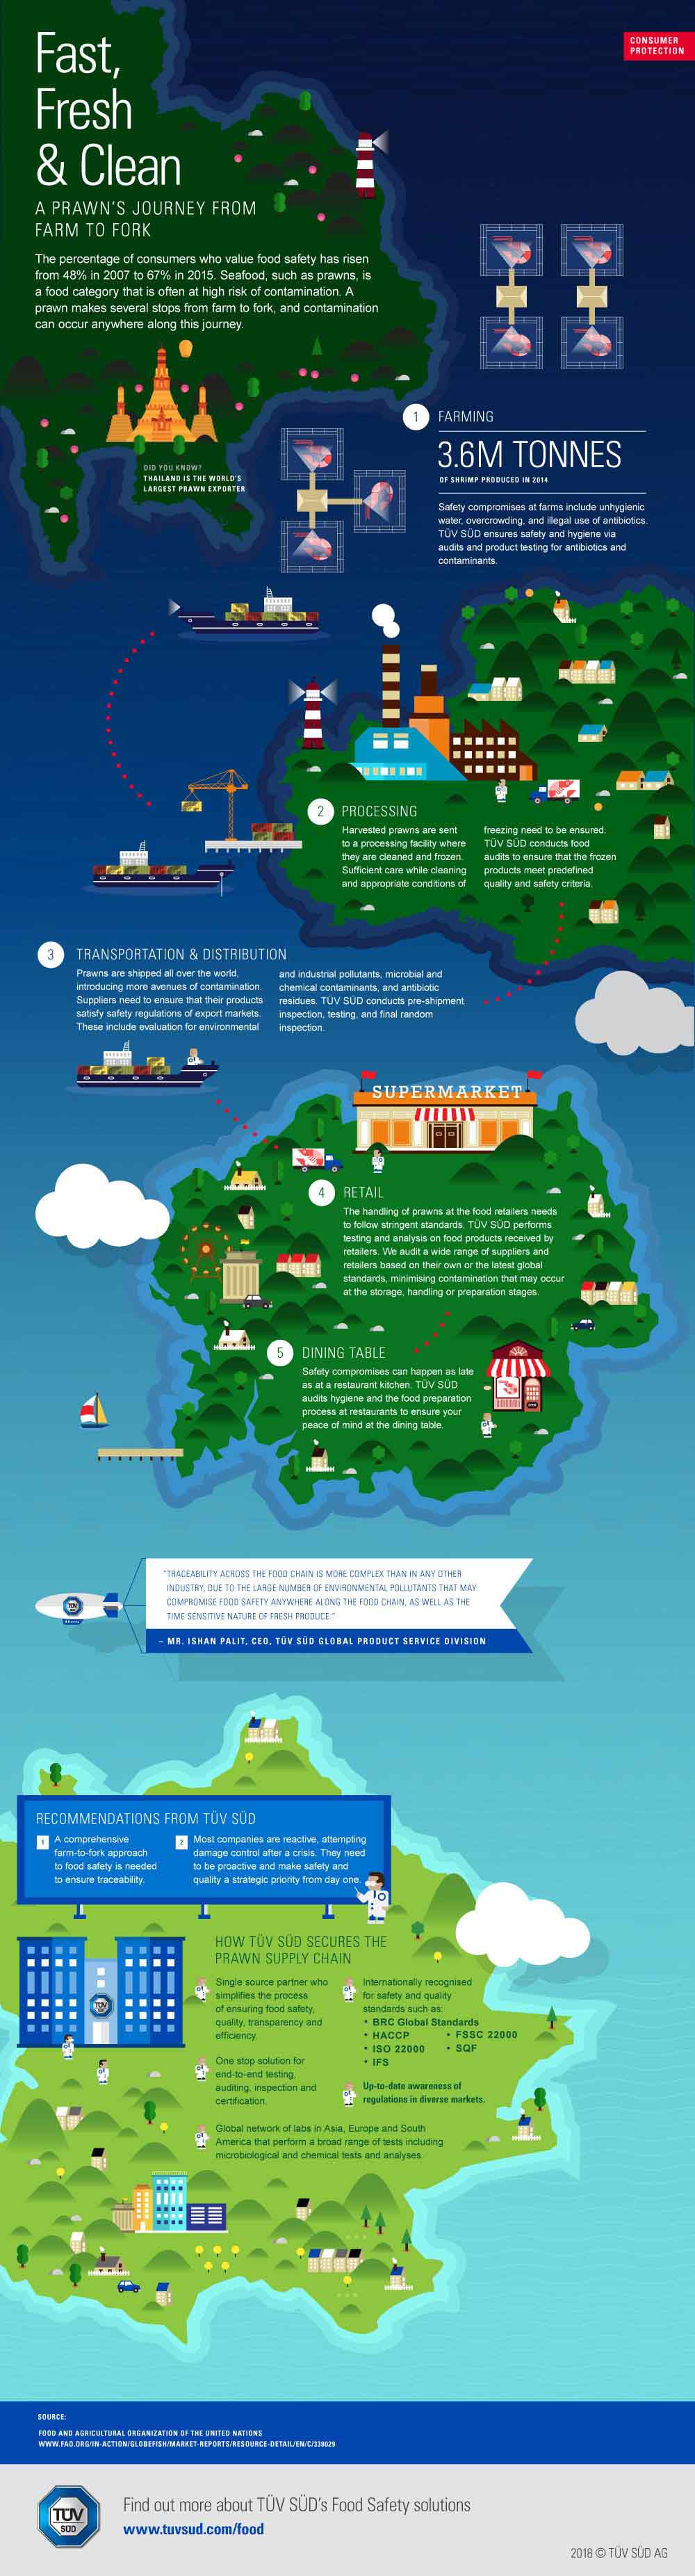 Infographic on a prawn's journey from farm to fork